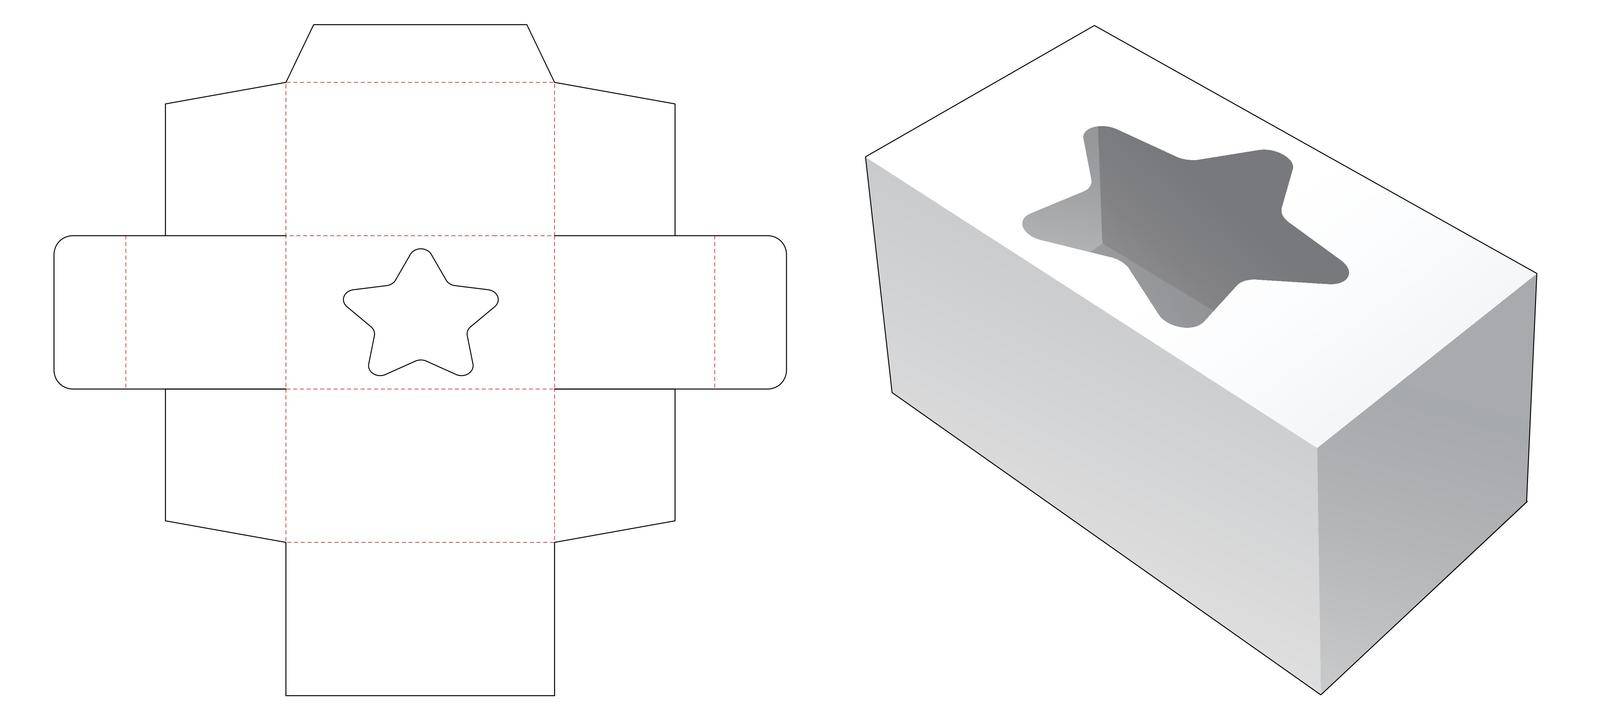 Rectangular box with star shaped window die cut template by valueinvestor